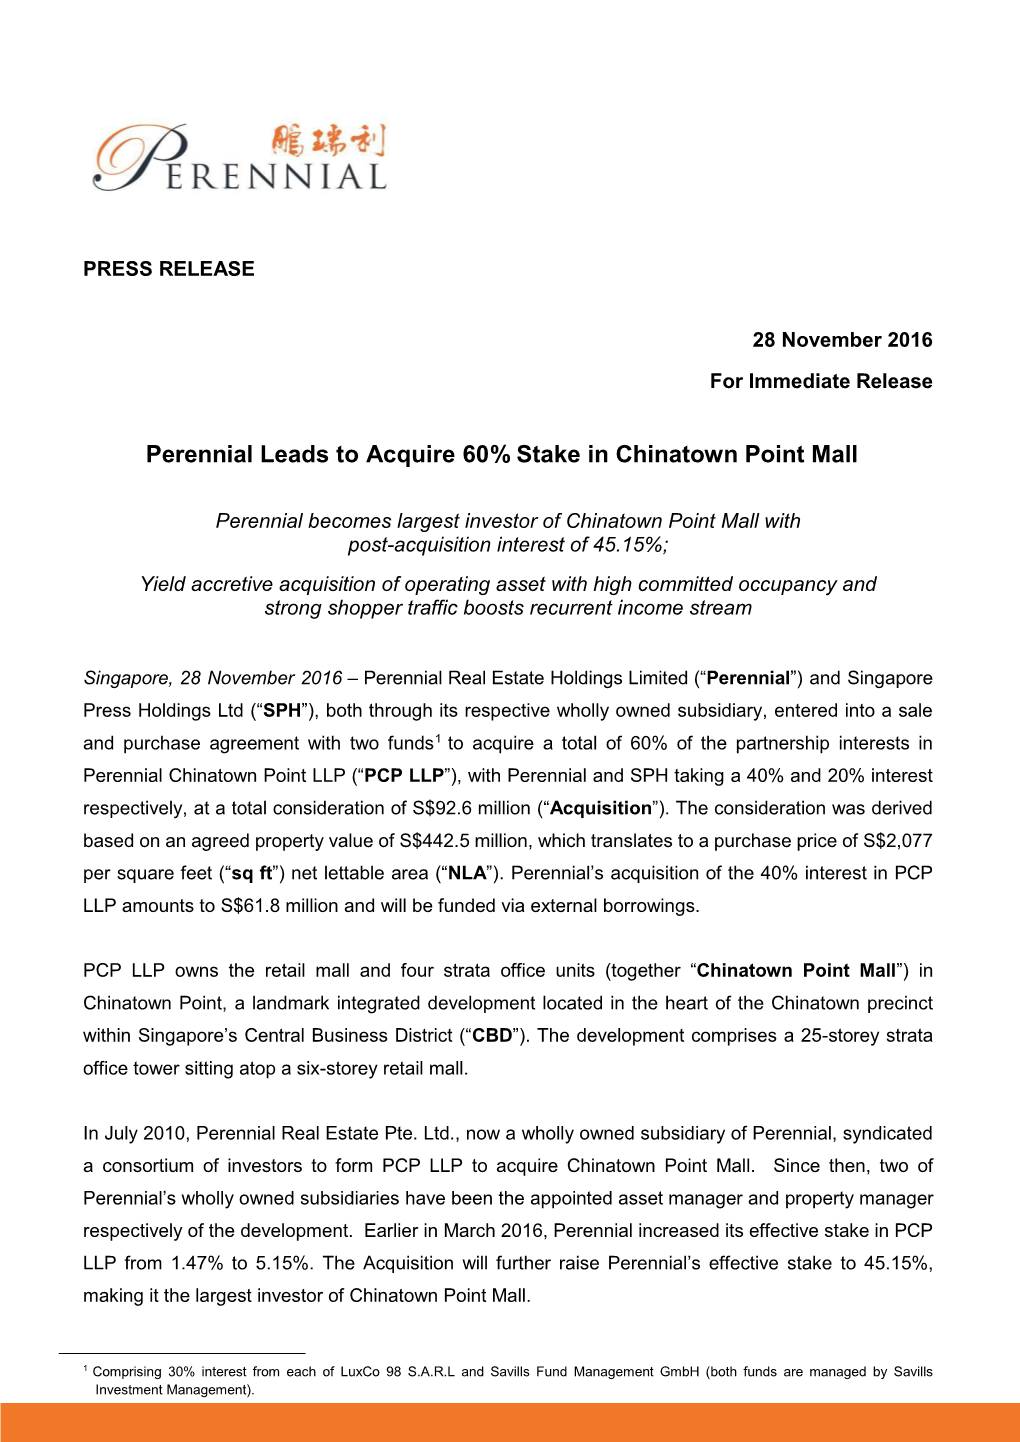 Perennial Leads to Acquire 60% Stake in Chinatown Point Mall